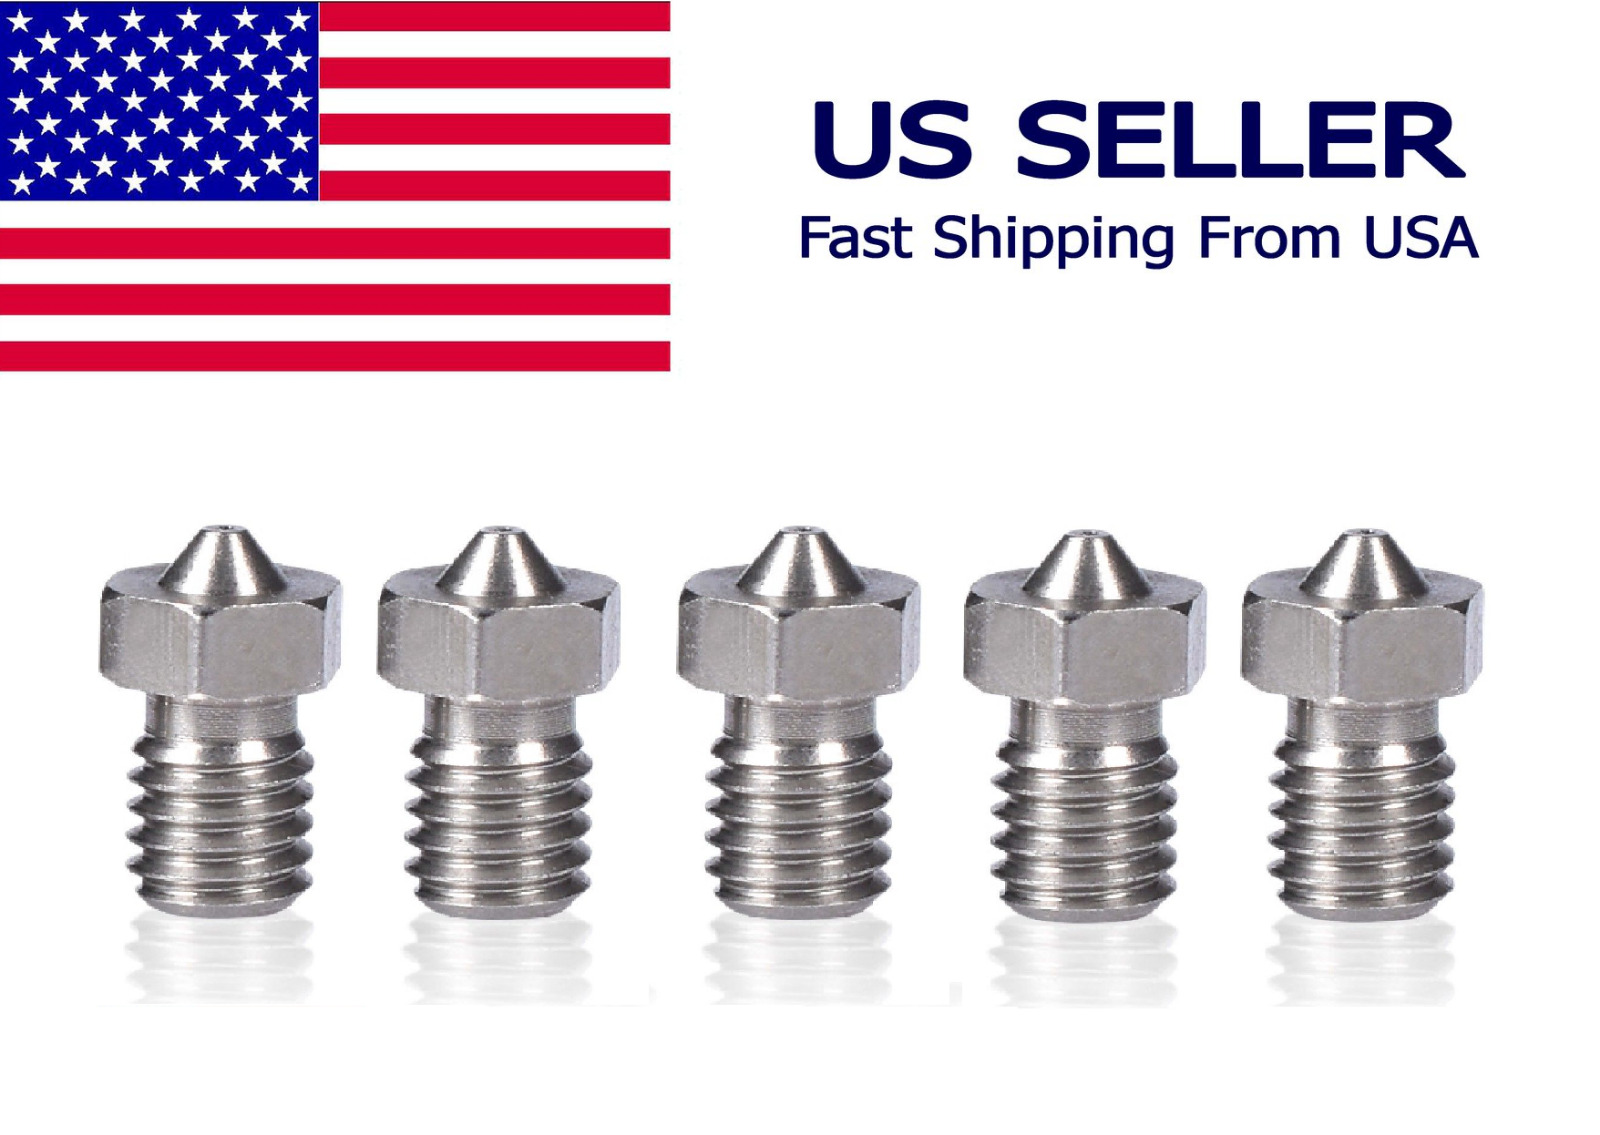 M6 0.4mm Stainless Steel Nozzle Extruder Hotend 1.75mm Filament E-3D V5-V6